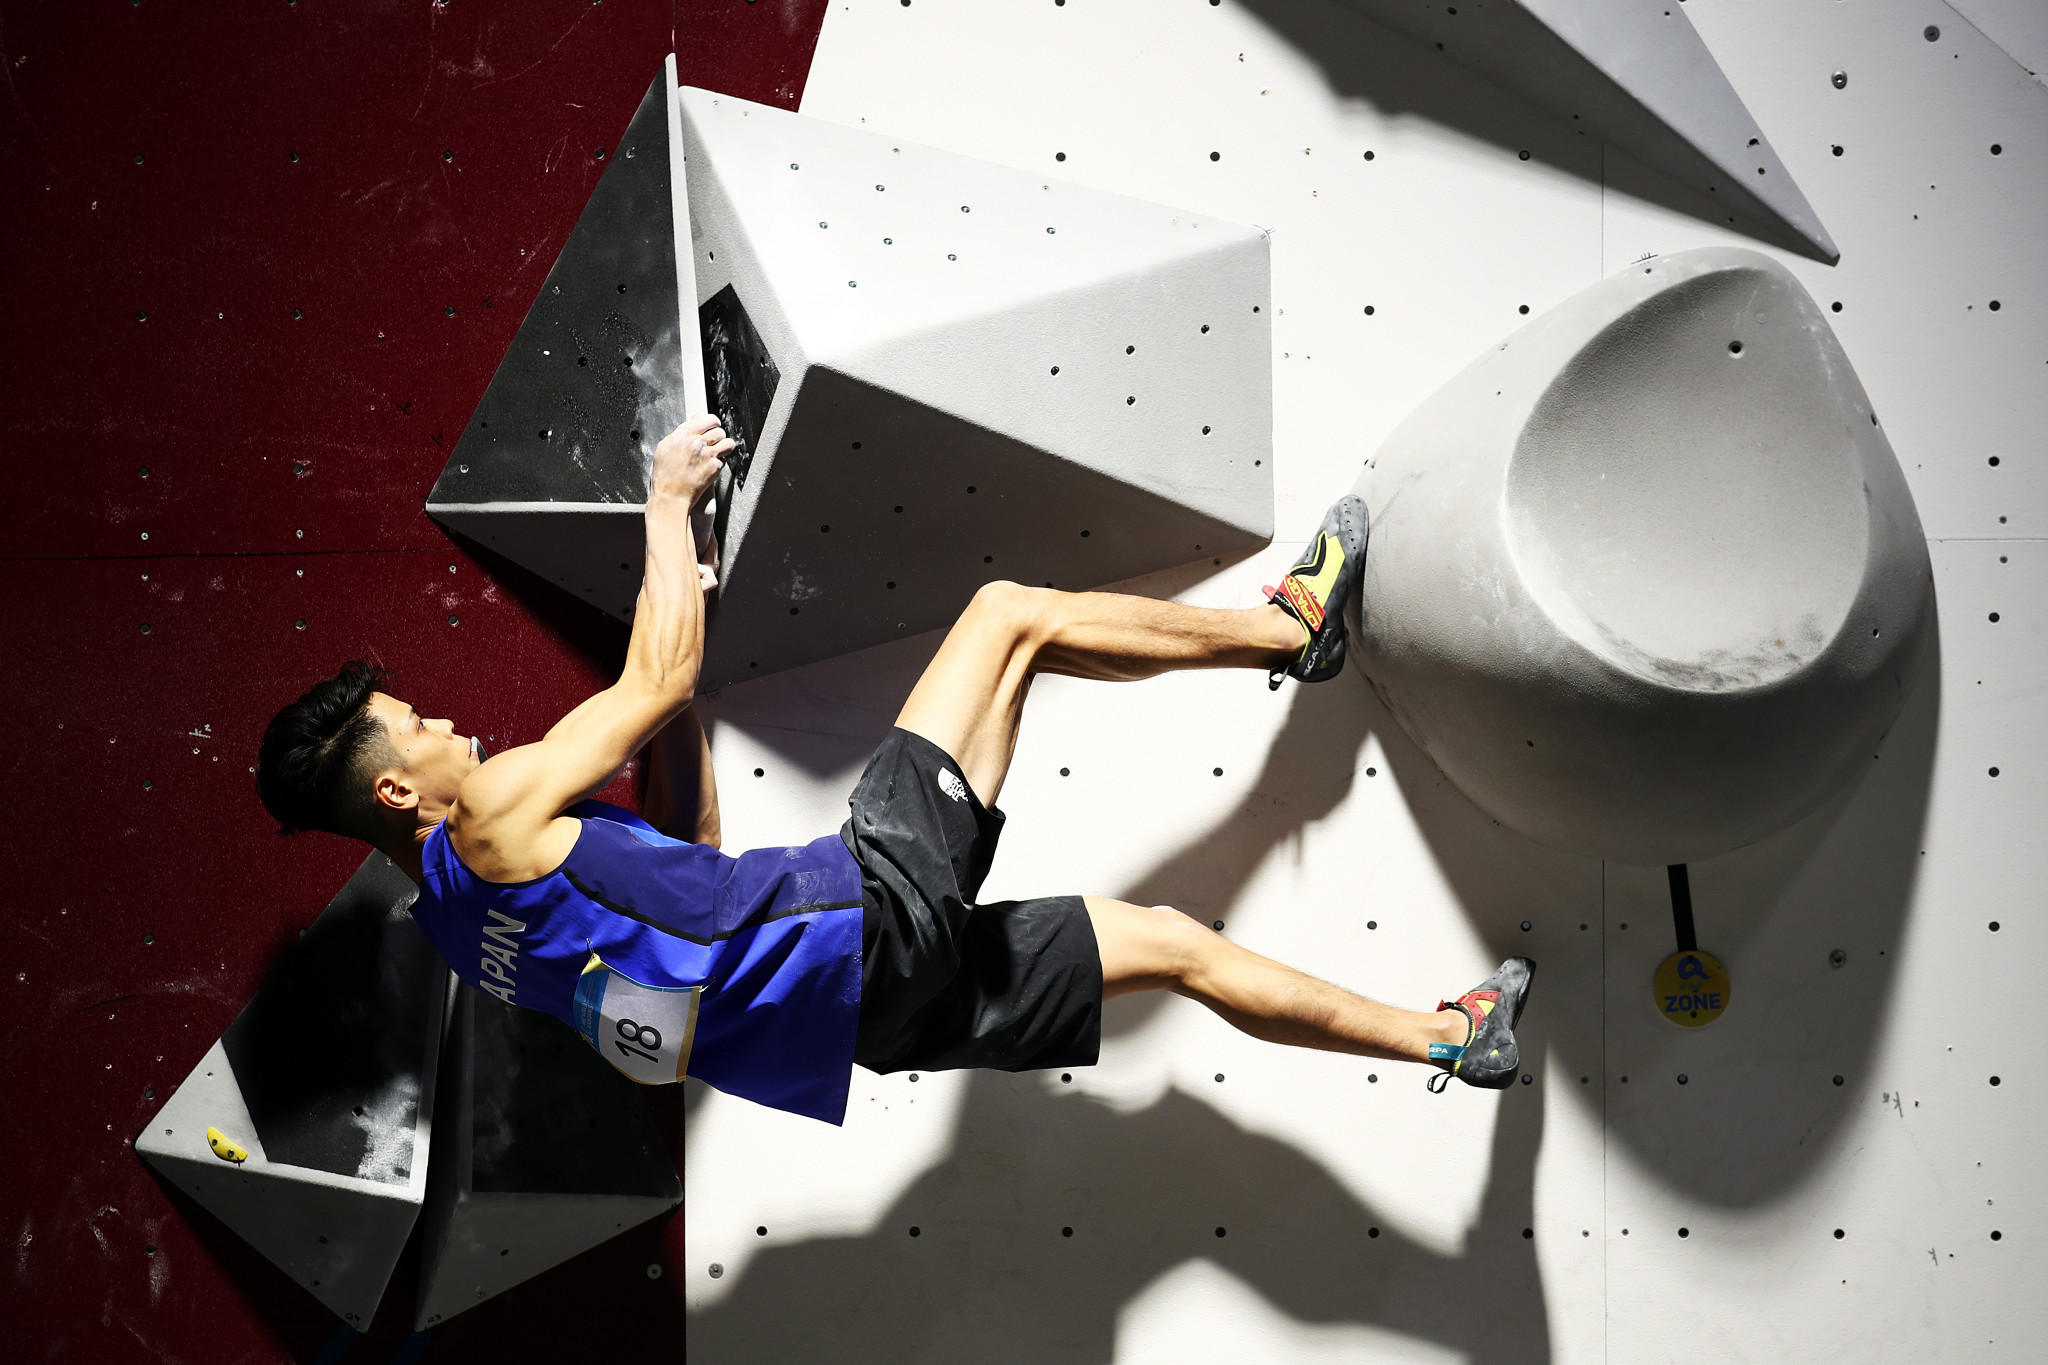 IFSC President says ANOC World Beach Games gave climbers a boost en-route to Tokyo 2020